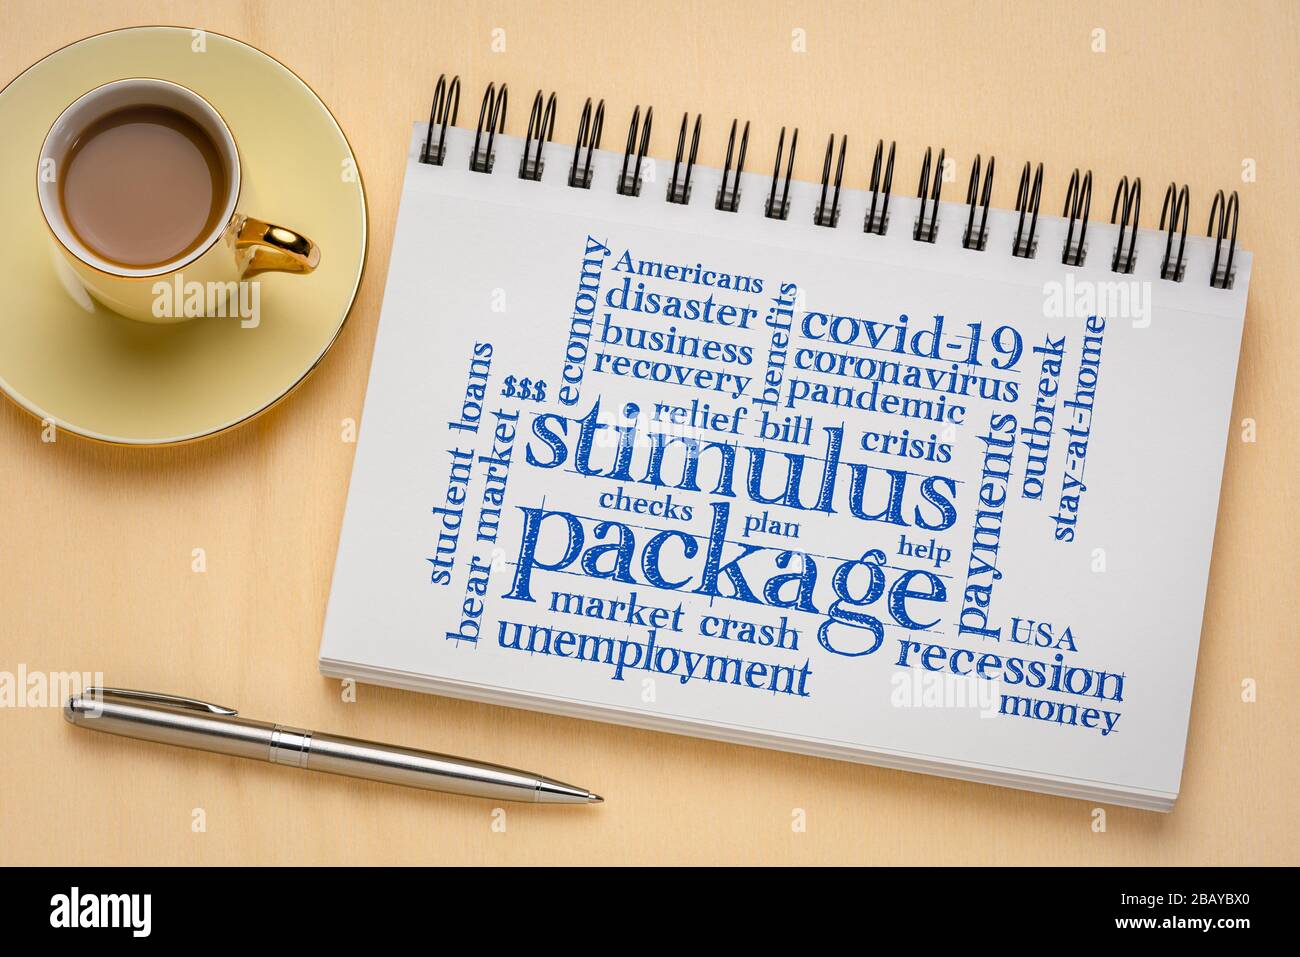 stimulus package word cloud in sketchbook, relief bill during covid-19 coronavirus pandemic concept Stock Photo